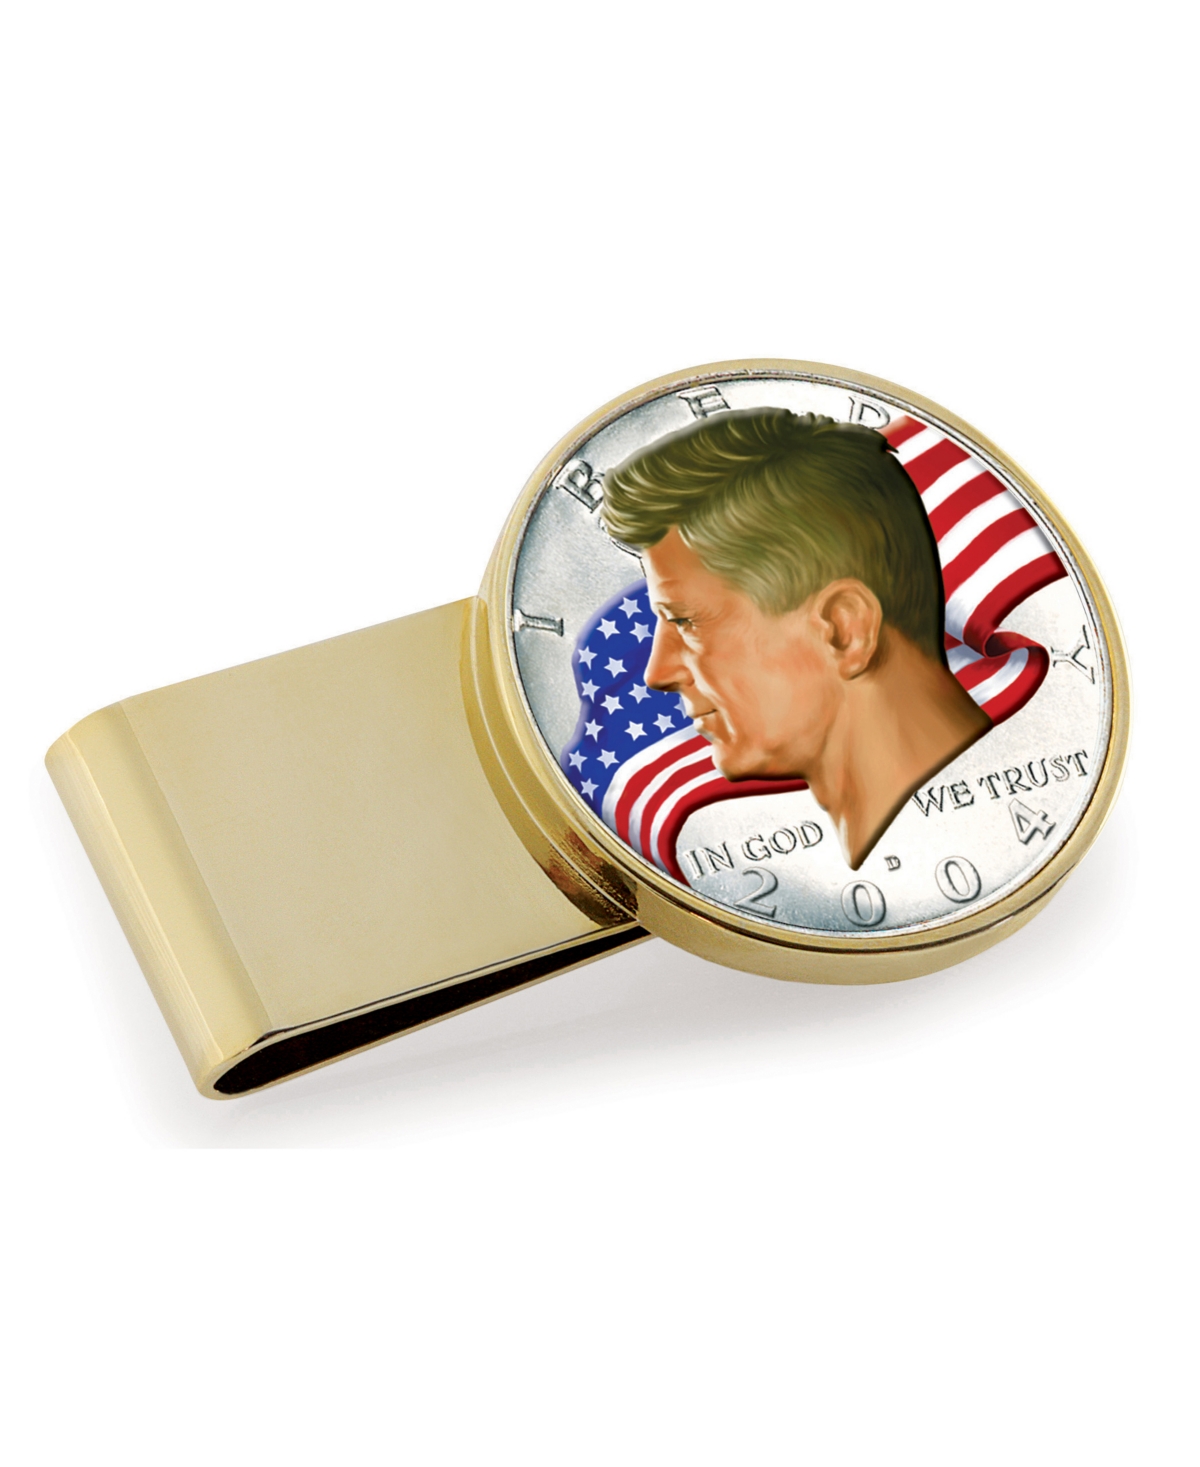 Men's American Coin Treasures Jfk Half Dollar Colorized American Flag Stainless Steel Coin Money Clip - Gold